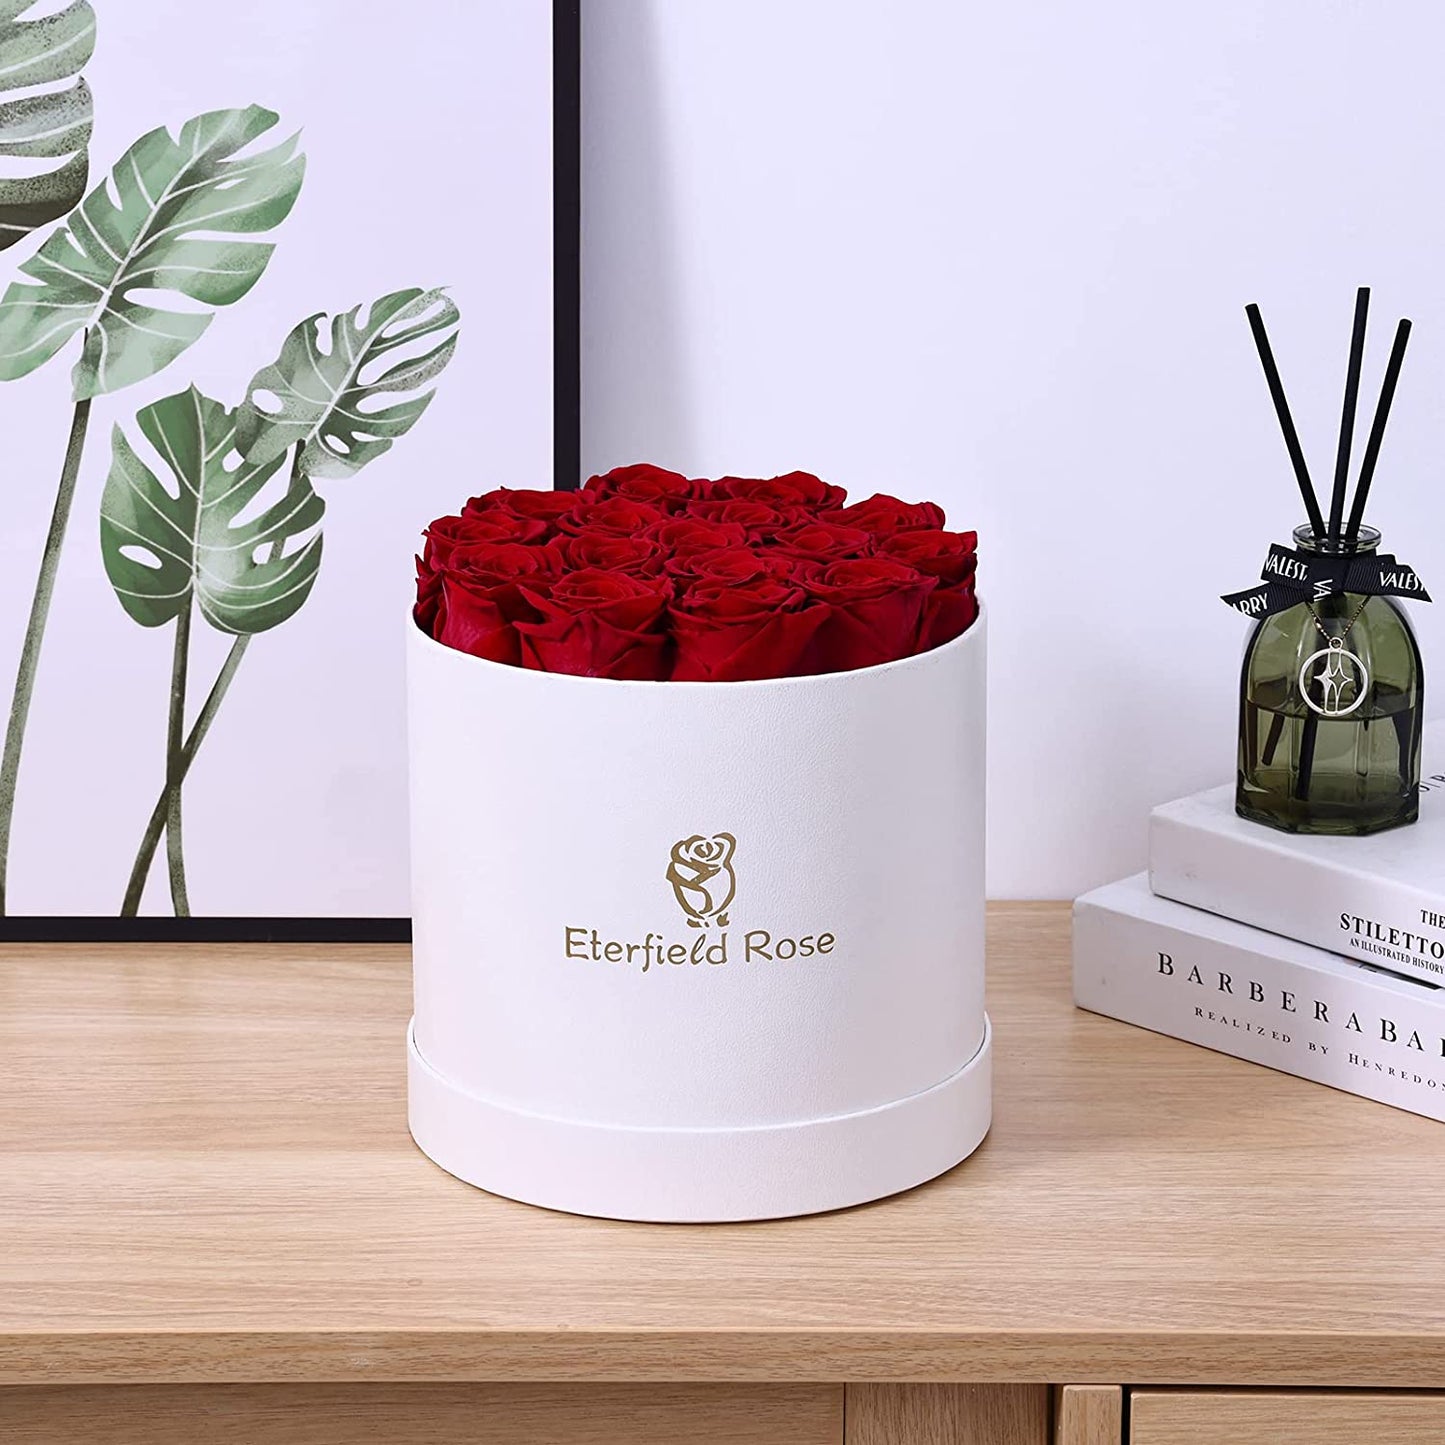 A white box holding 16 red roses is on a wooden table.